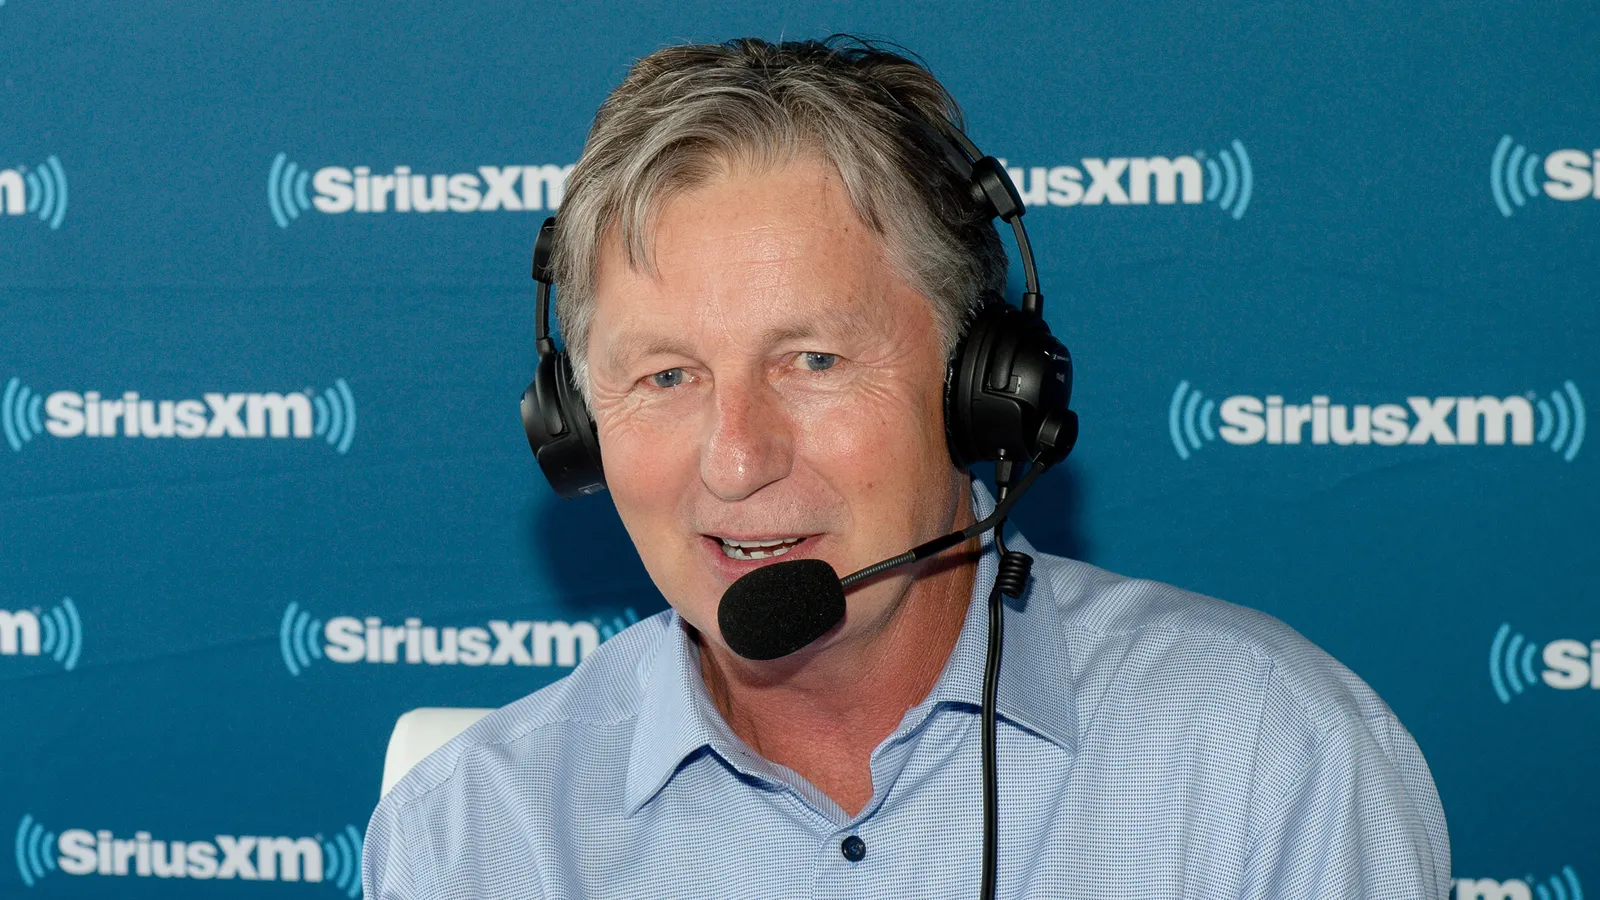 Brandel Chamblee Reveals His Solution For LIV Golfers Returning To The PGA Tour